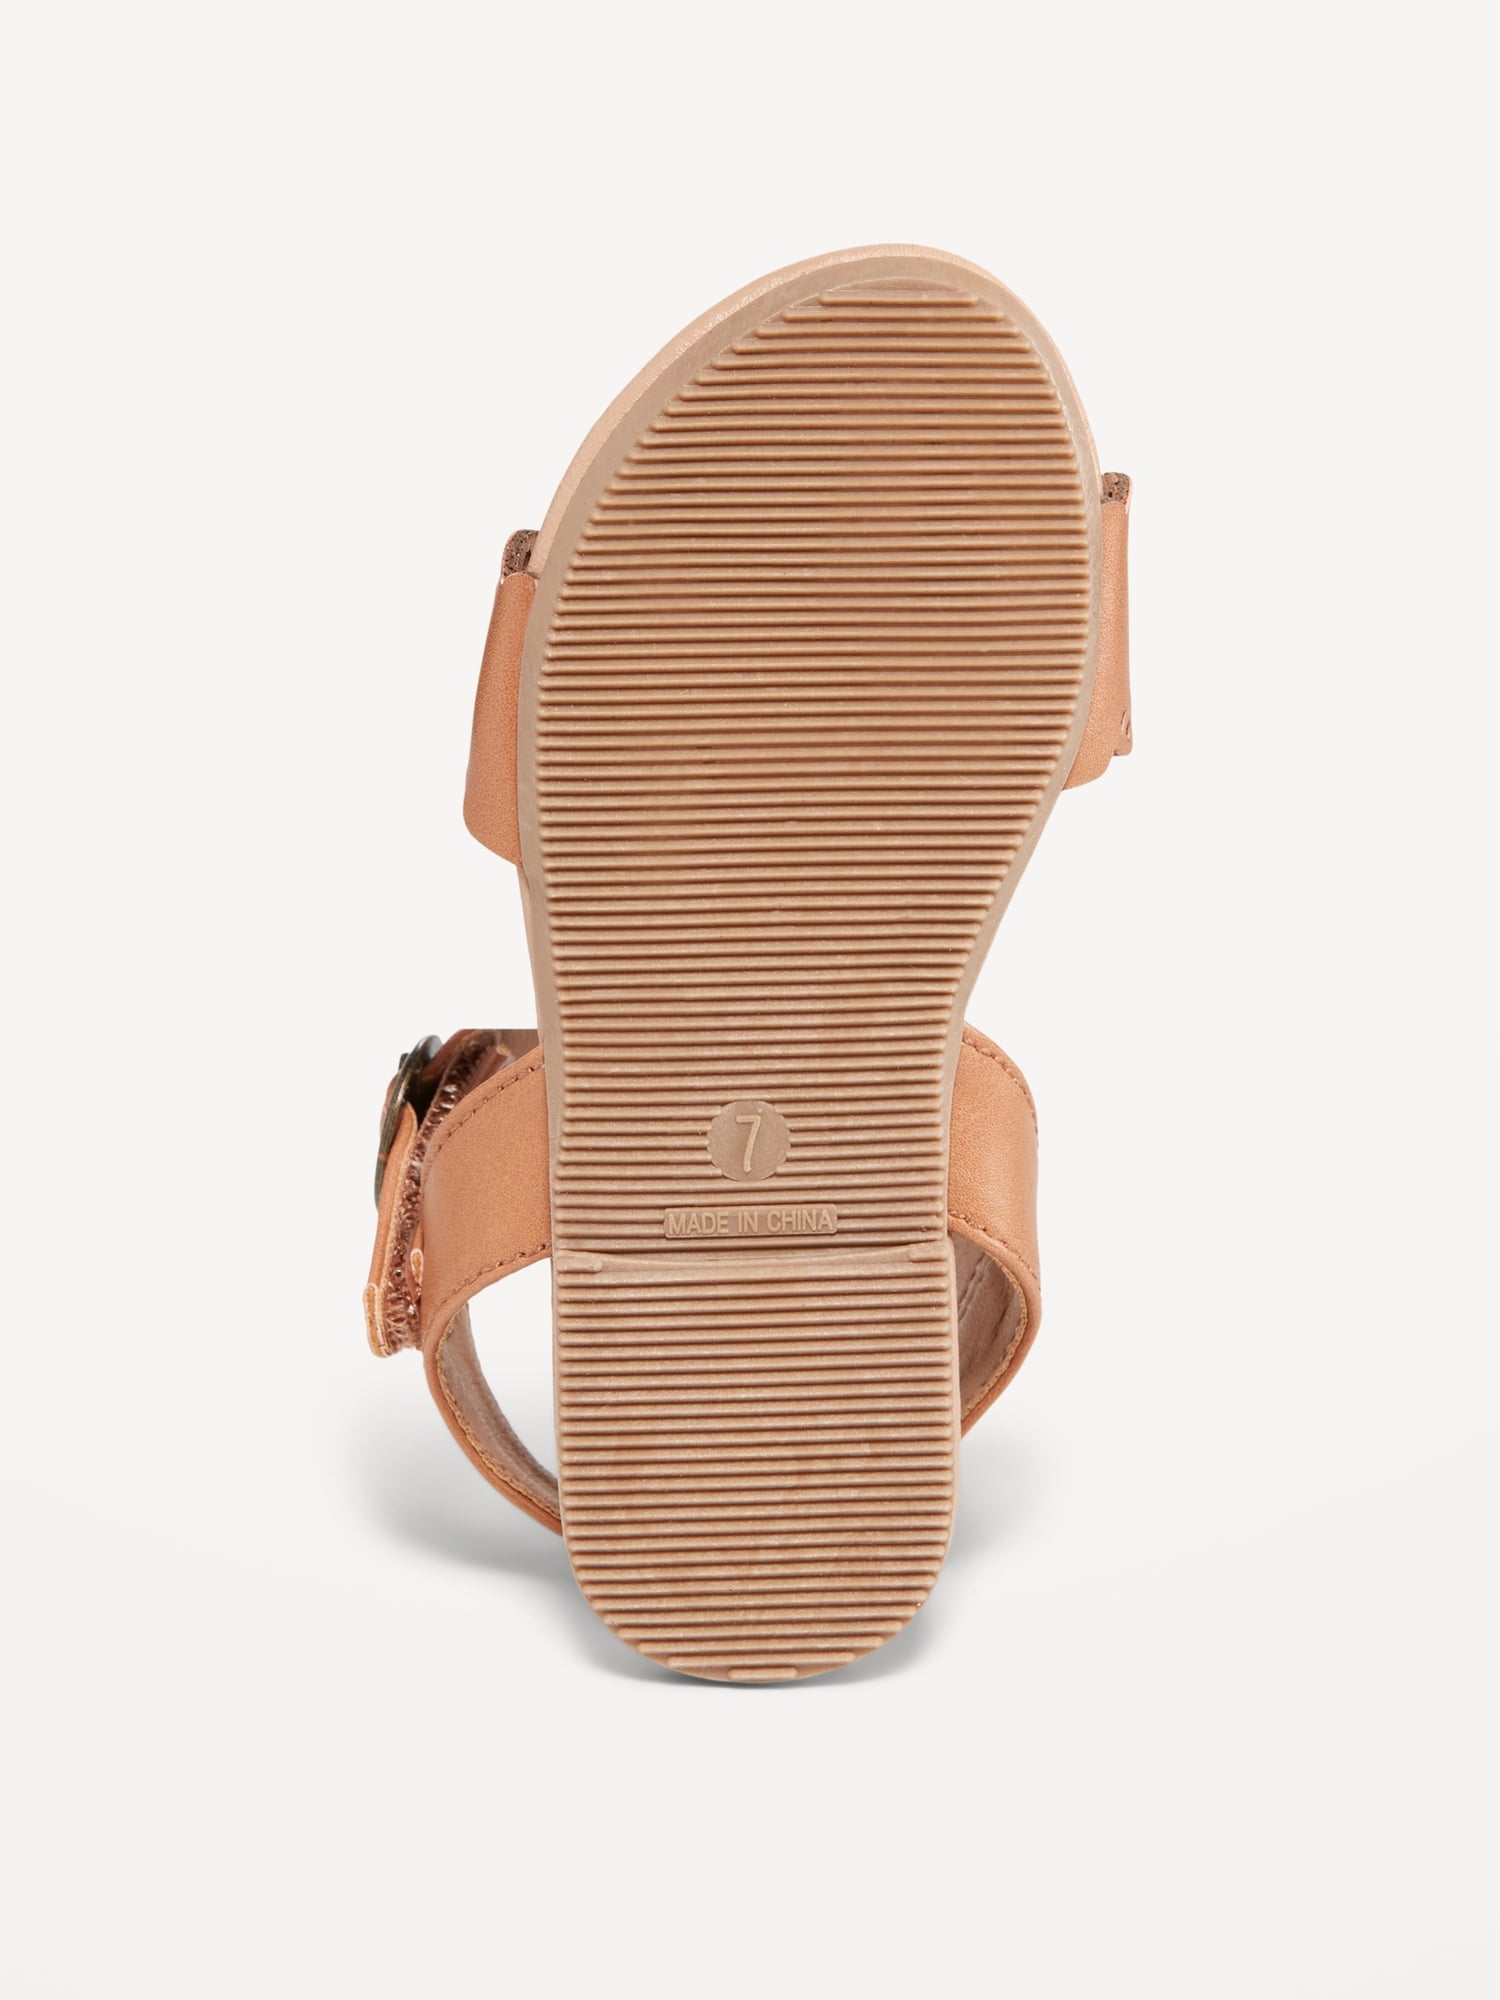 Faux-Leather Scallop-Trim Sandals for Toddler Girls